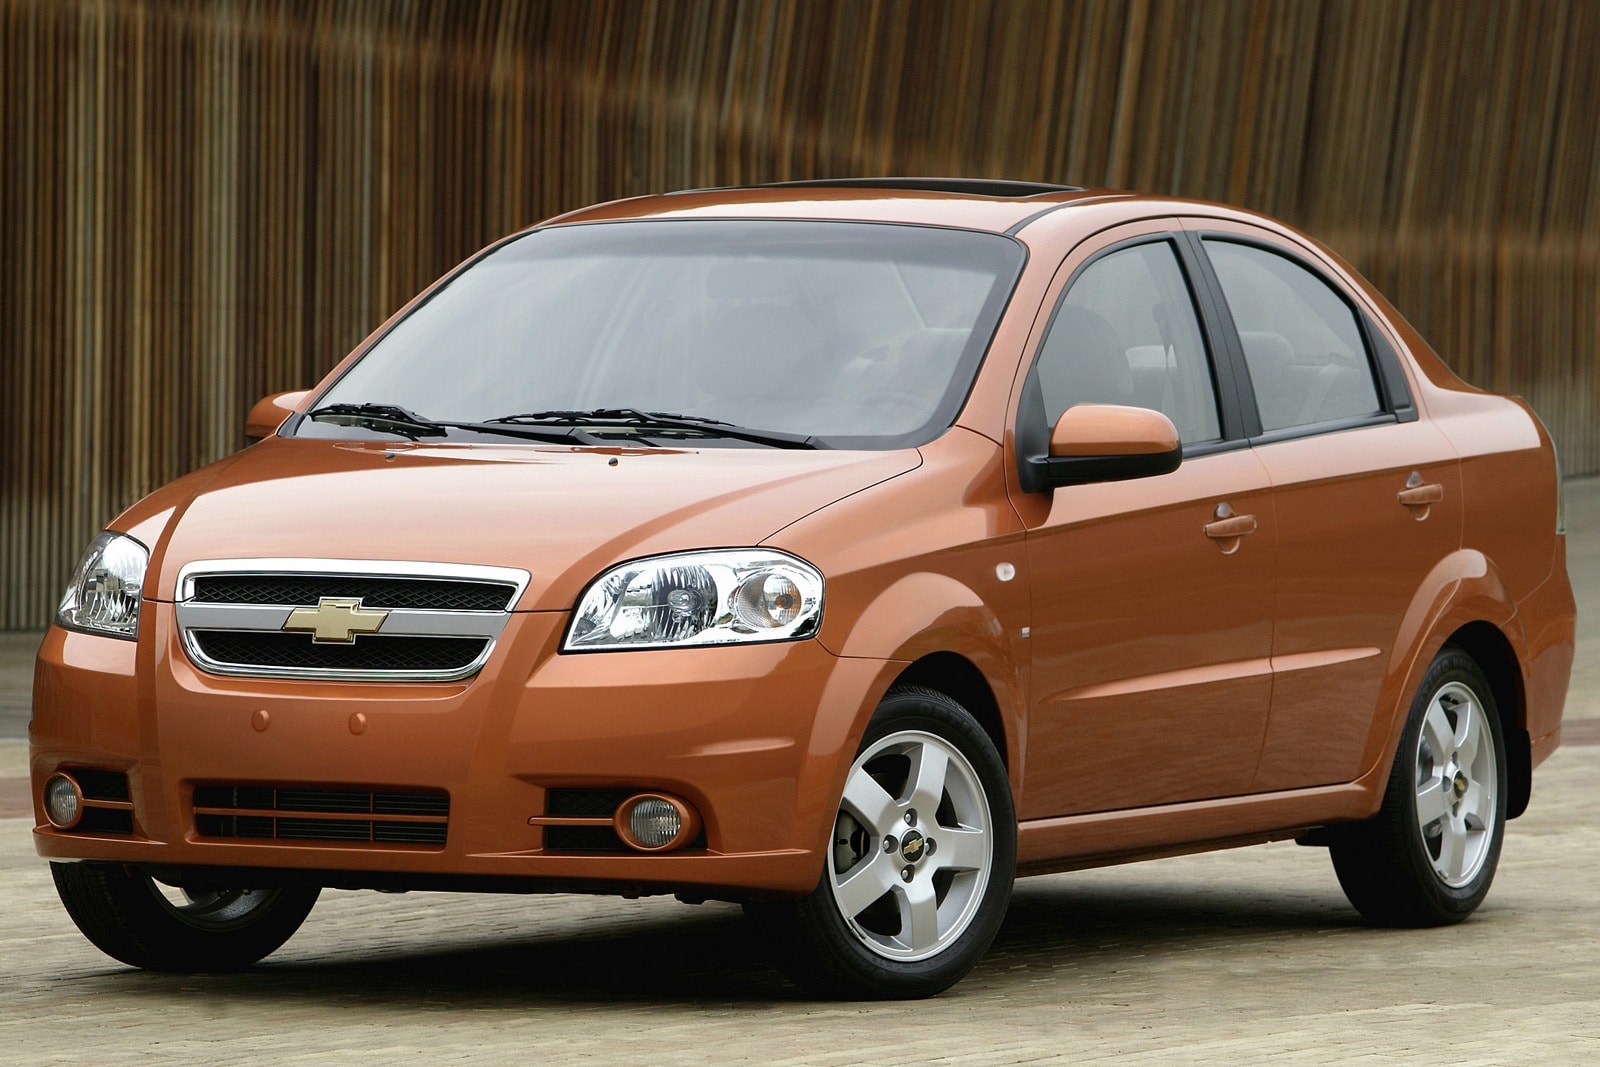 2007 Chevy Aveo Review & Ratings | Edmunds